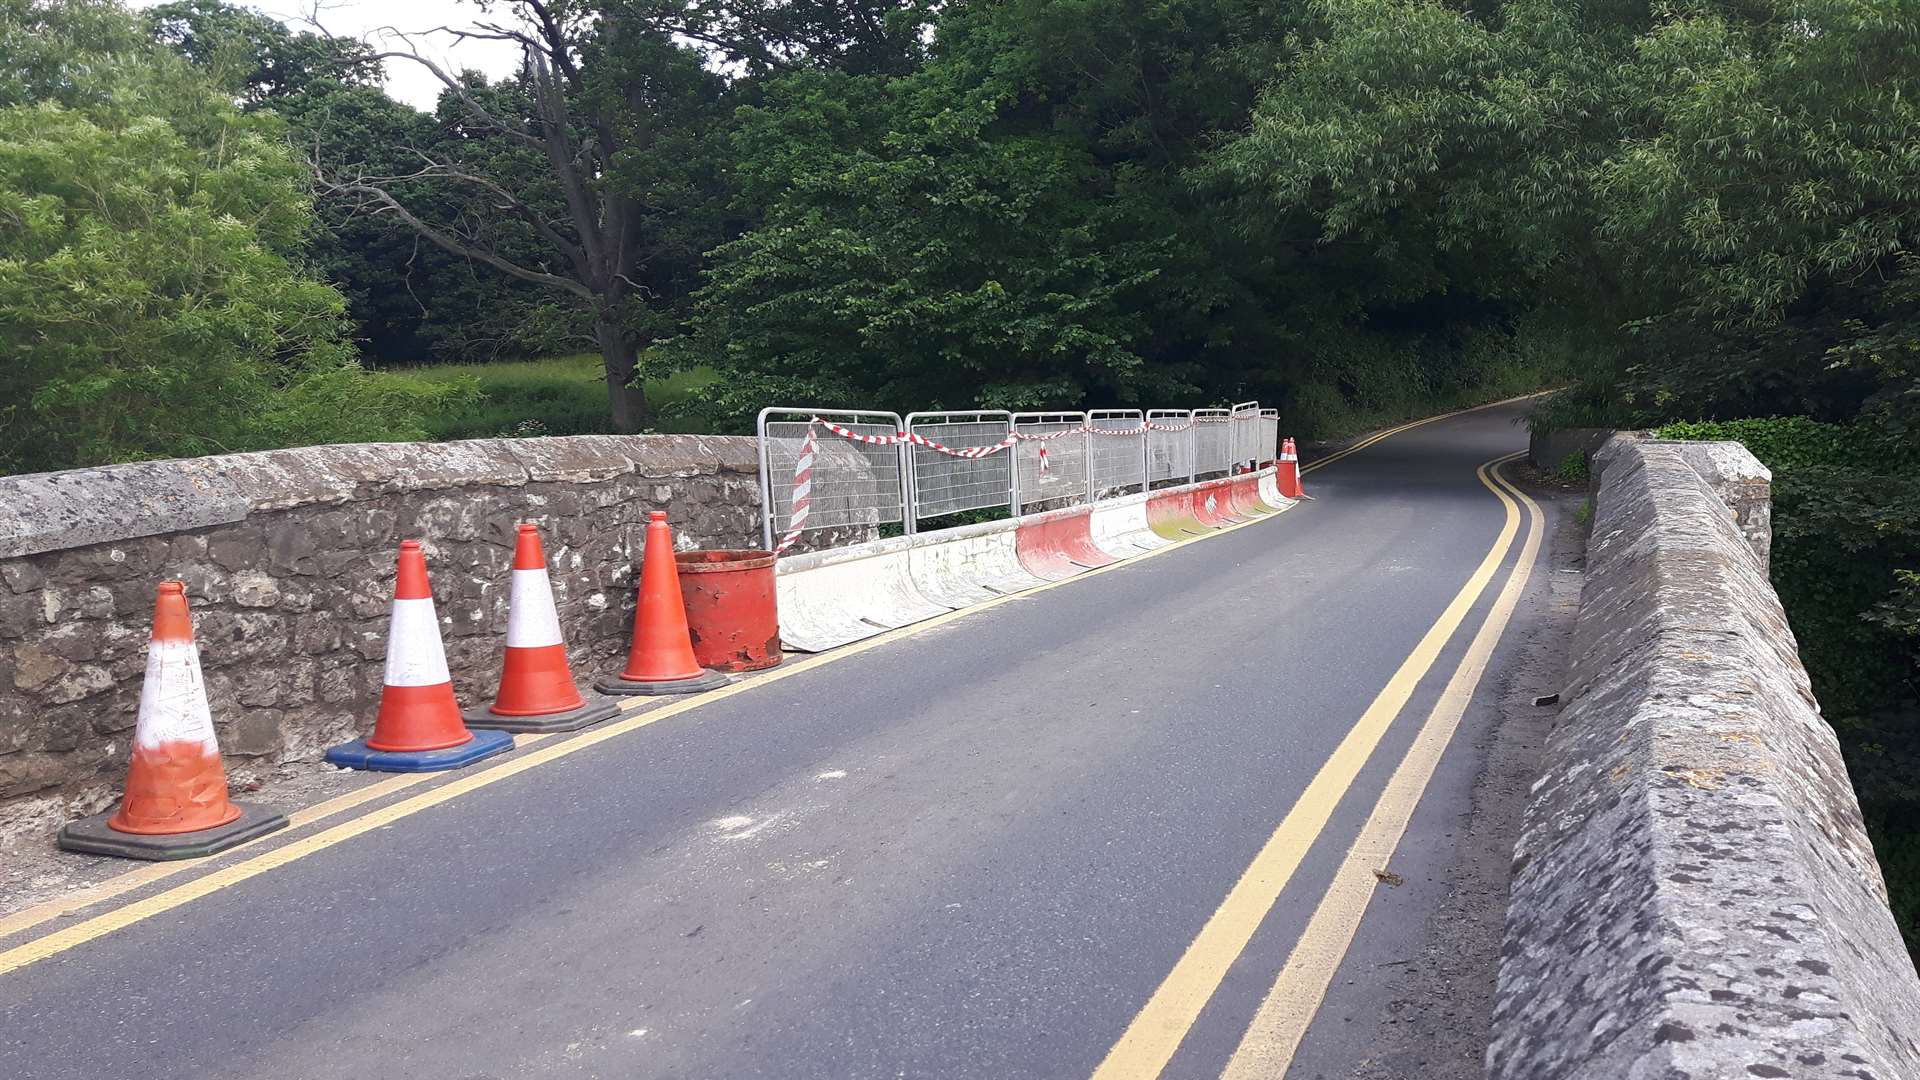 The bridge was shut temporarily following the discovery of a hole in the wall